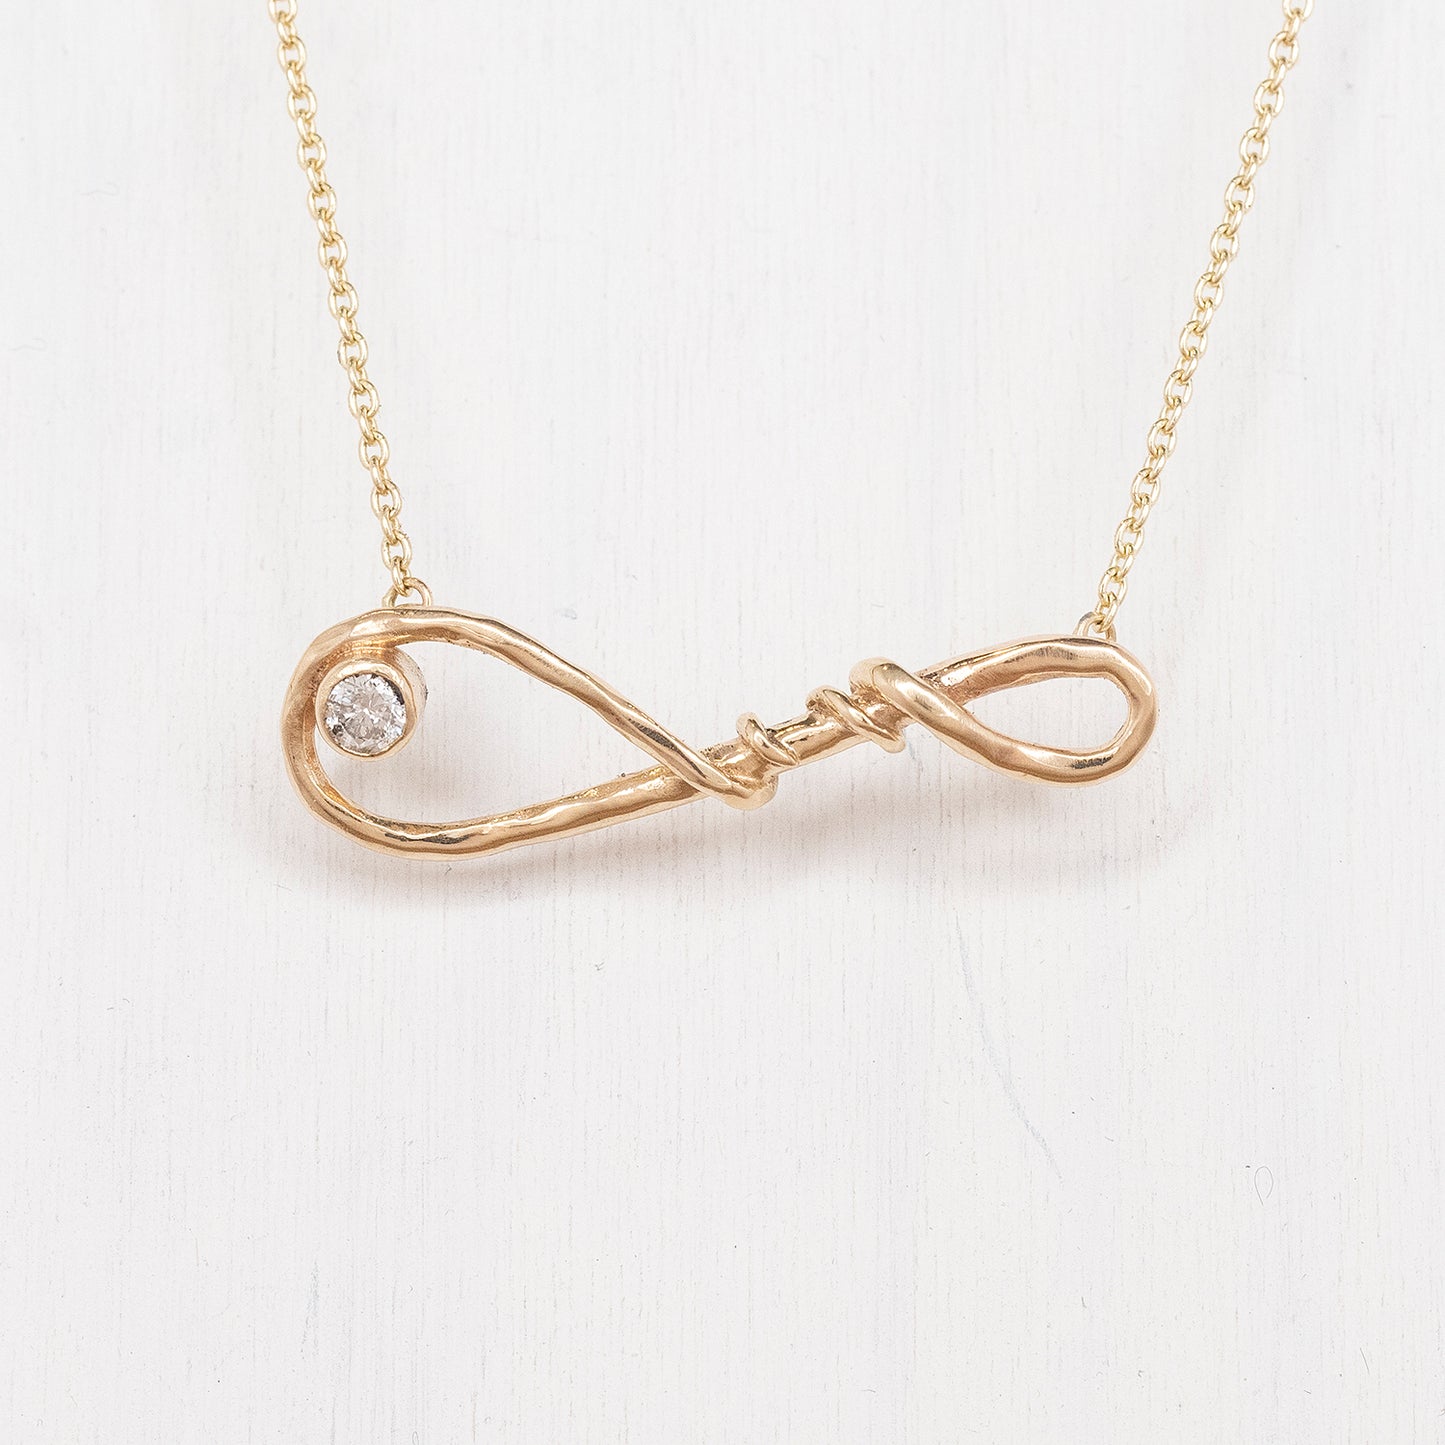 14k Gold Fluid Link Necklace with Diamond